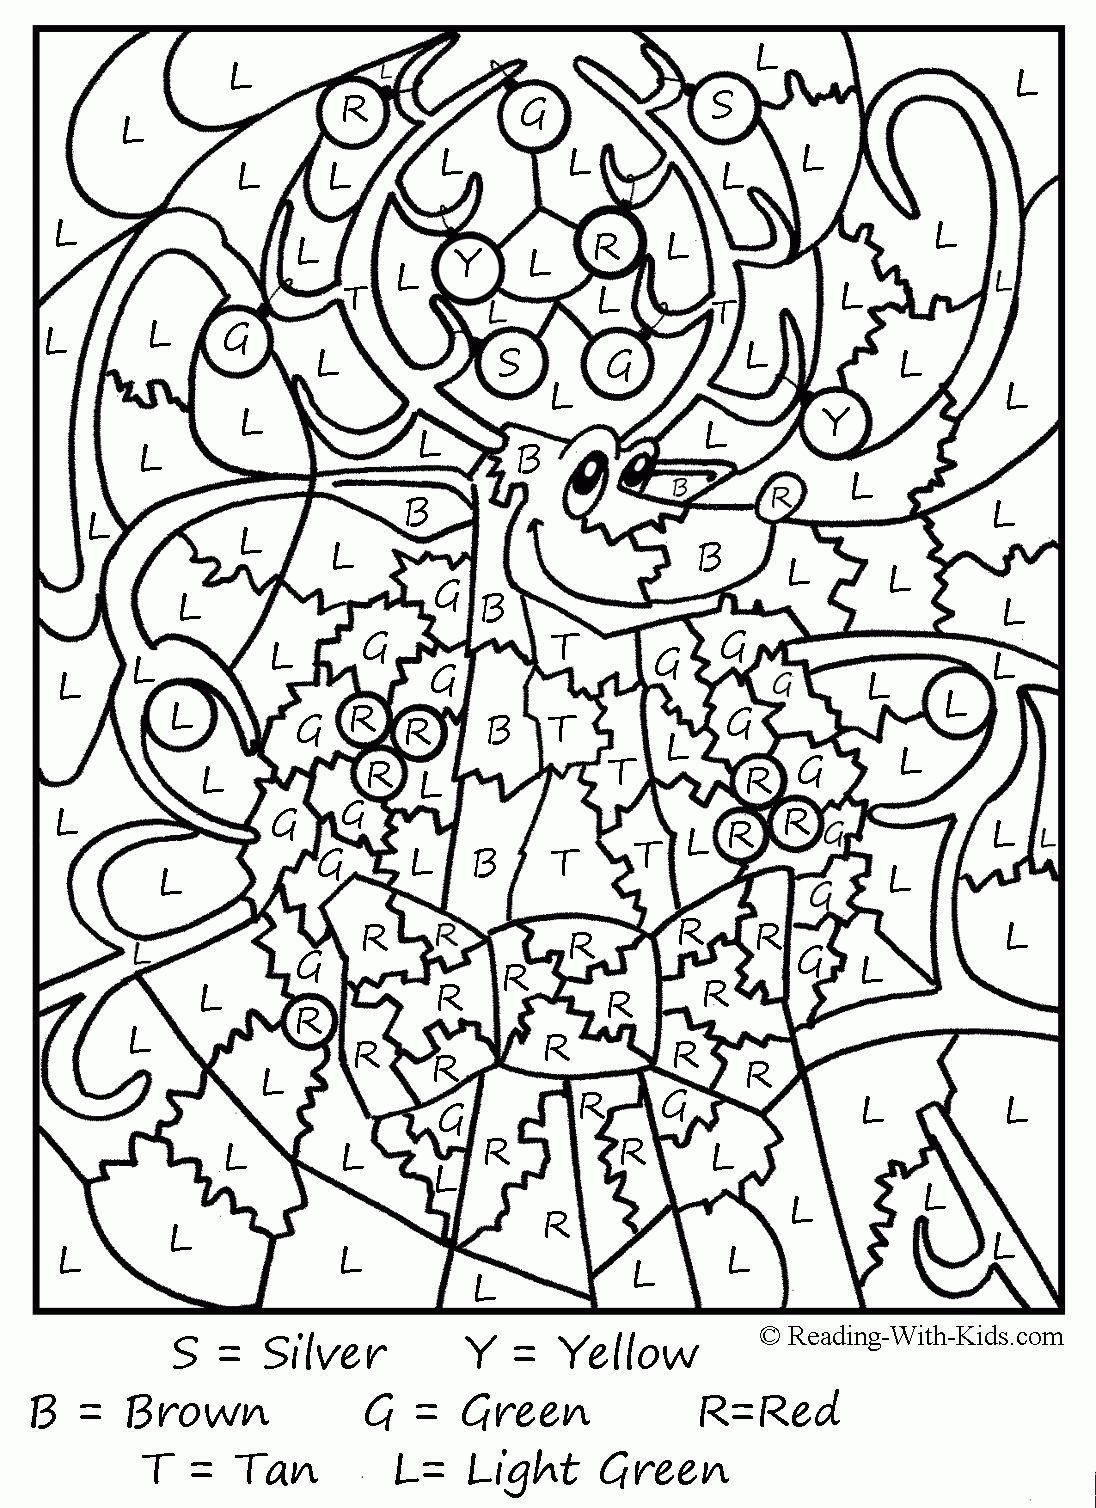 Download Free Color By Number Coloring Pages For Adults - Coloring Home